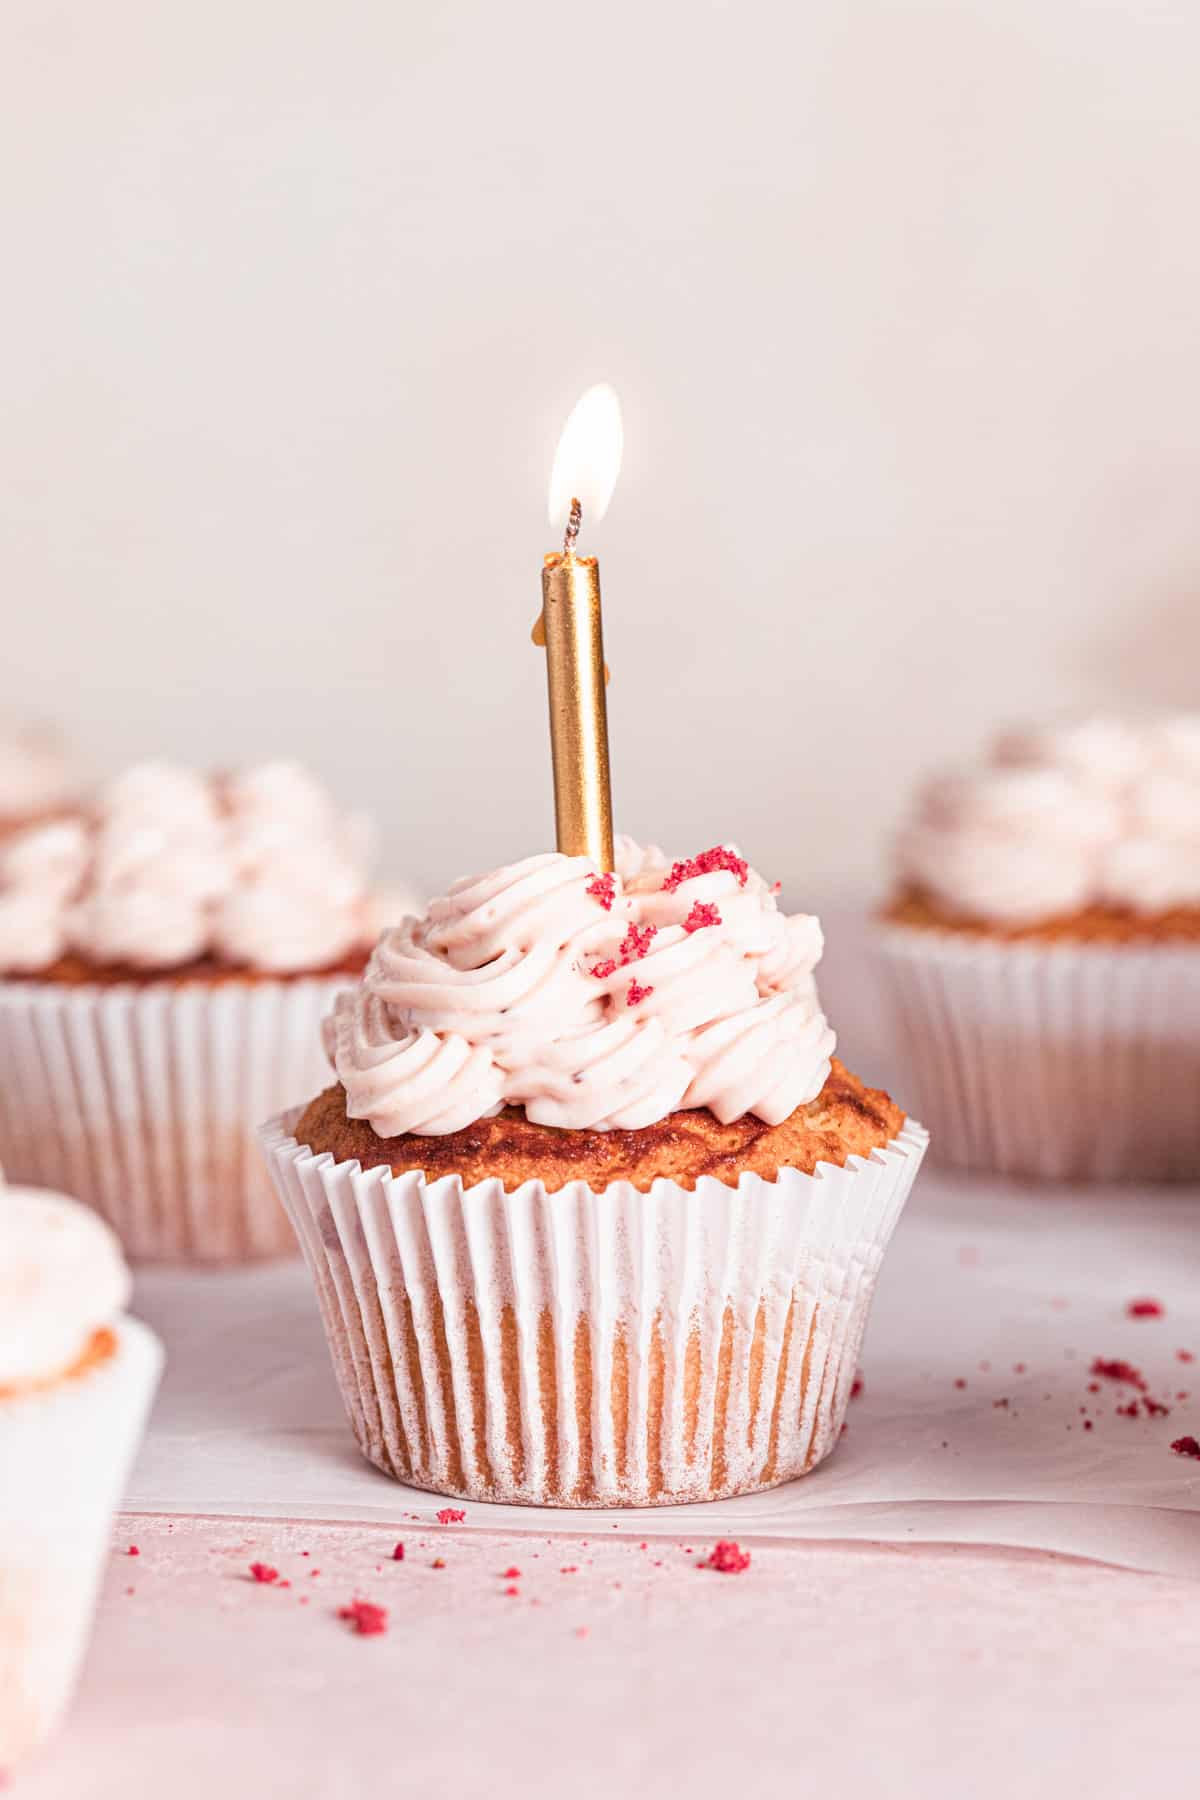 gluten free strawberry cupcakes on a light peach and pink backdrop with a lit birthday candle in the cupcake